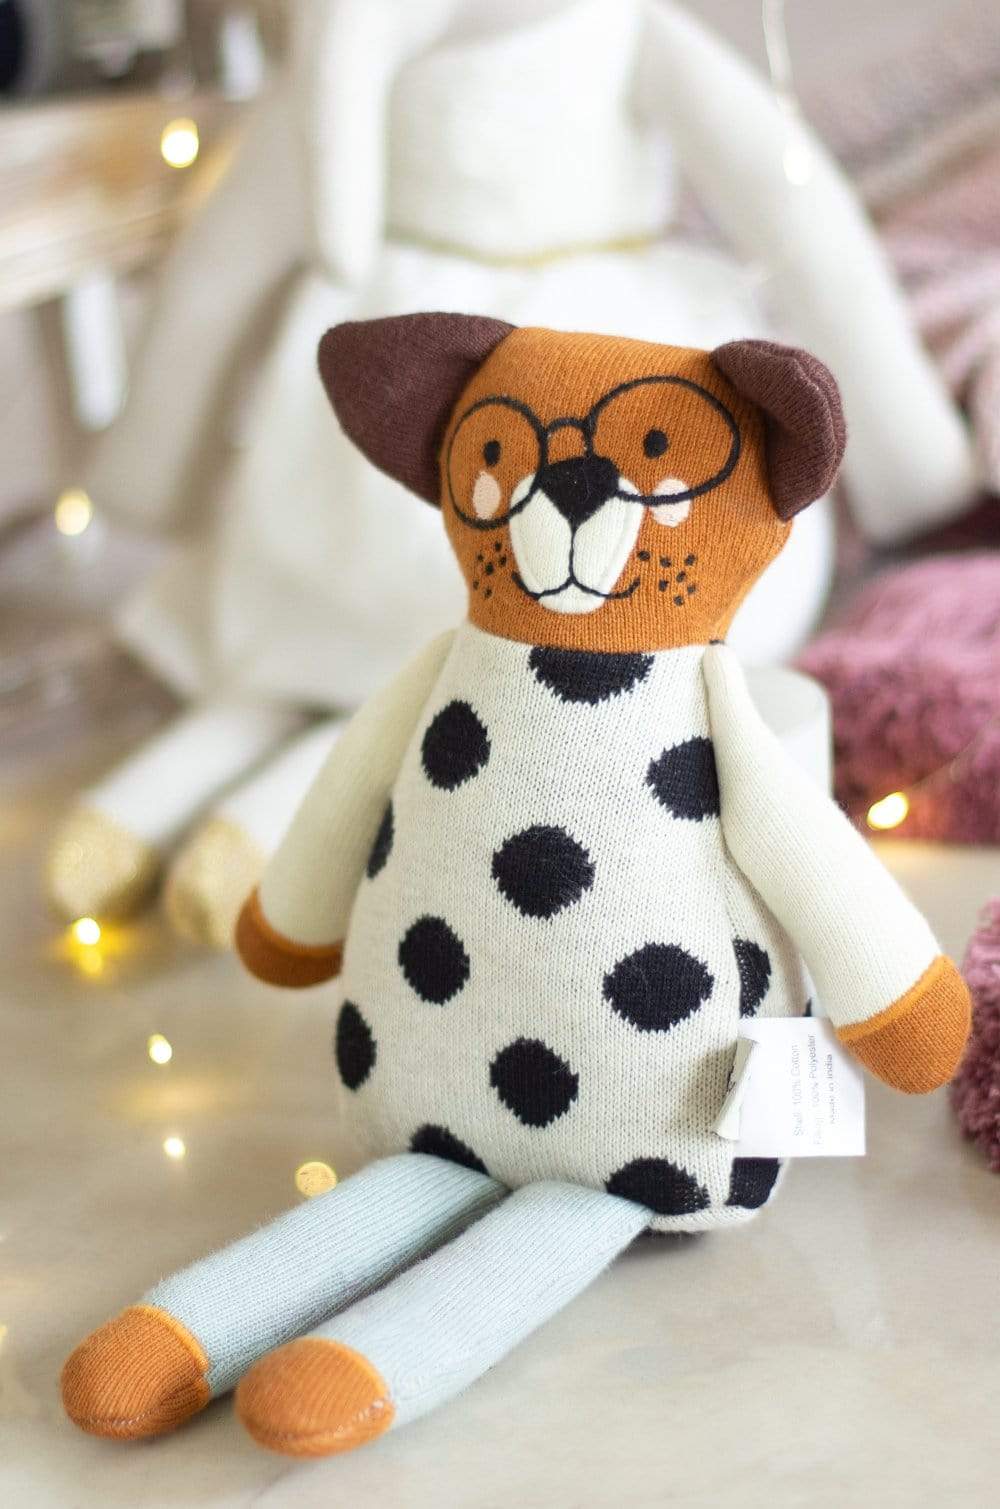 Mr. Whiskers Knitted Cotton Toy